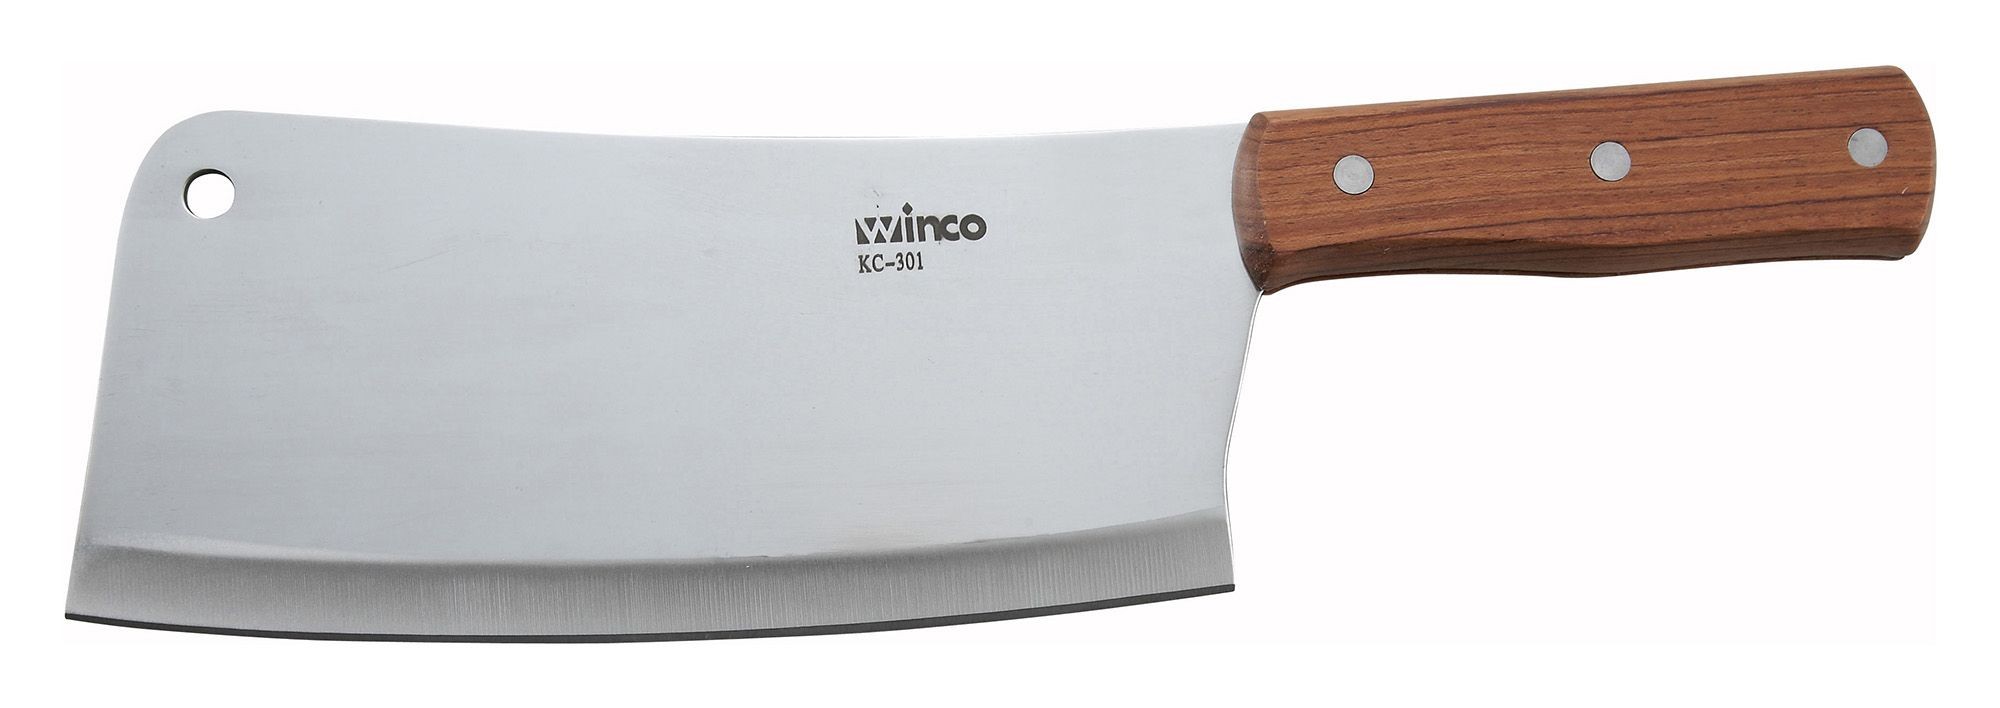 Winco KC-301 Heavy-Duty Chinese Cleaver with Wooden Handle 8"